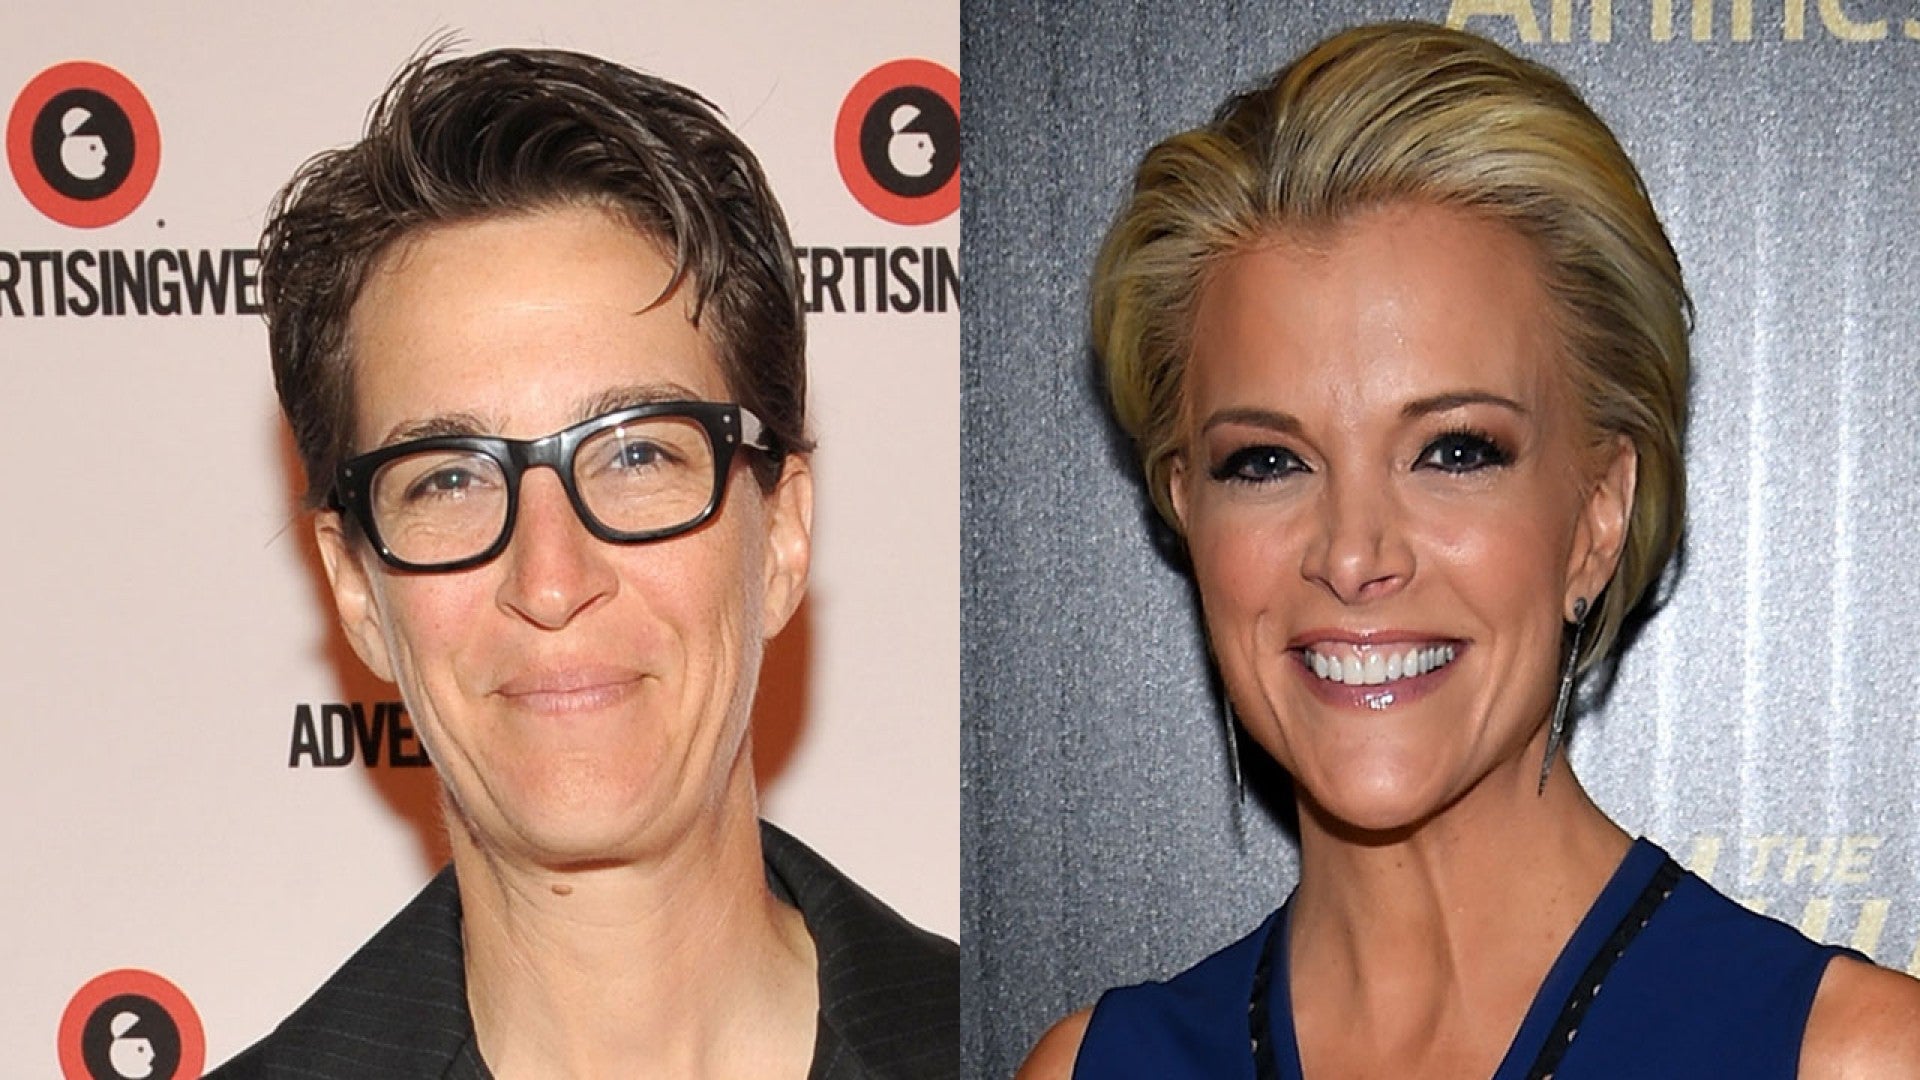 Rachel Maddow Weighs in on Megyn Kelly's Move to NBC | Entertainment Tonight